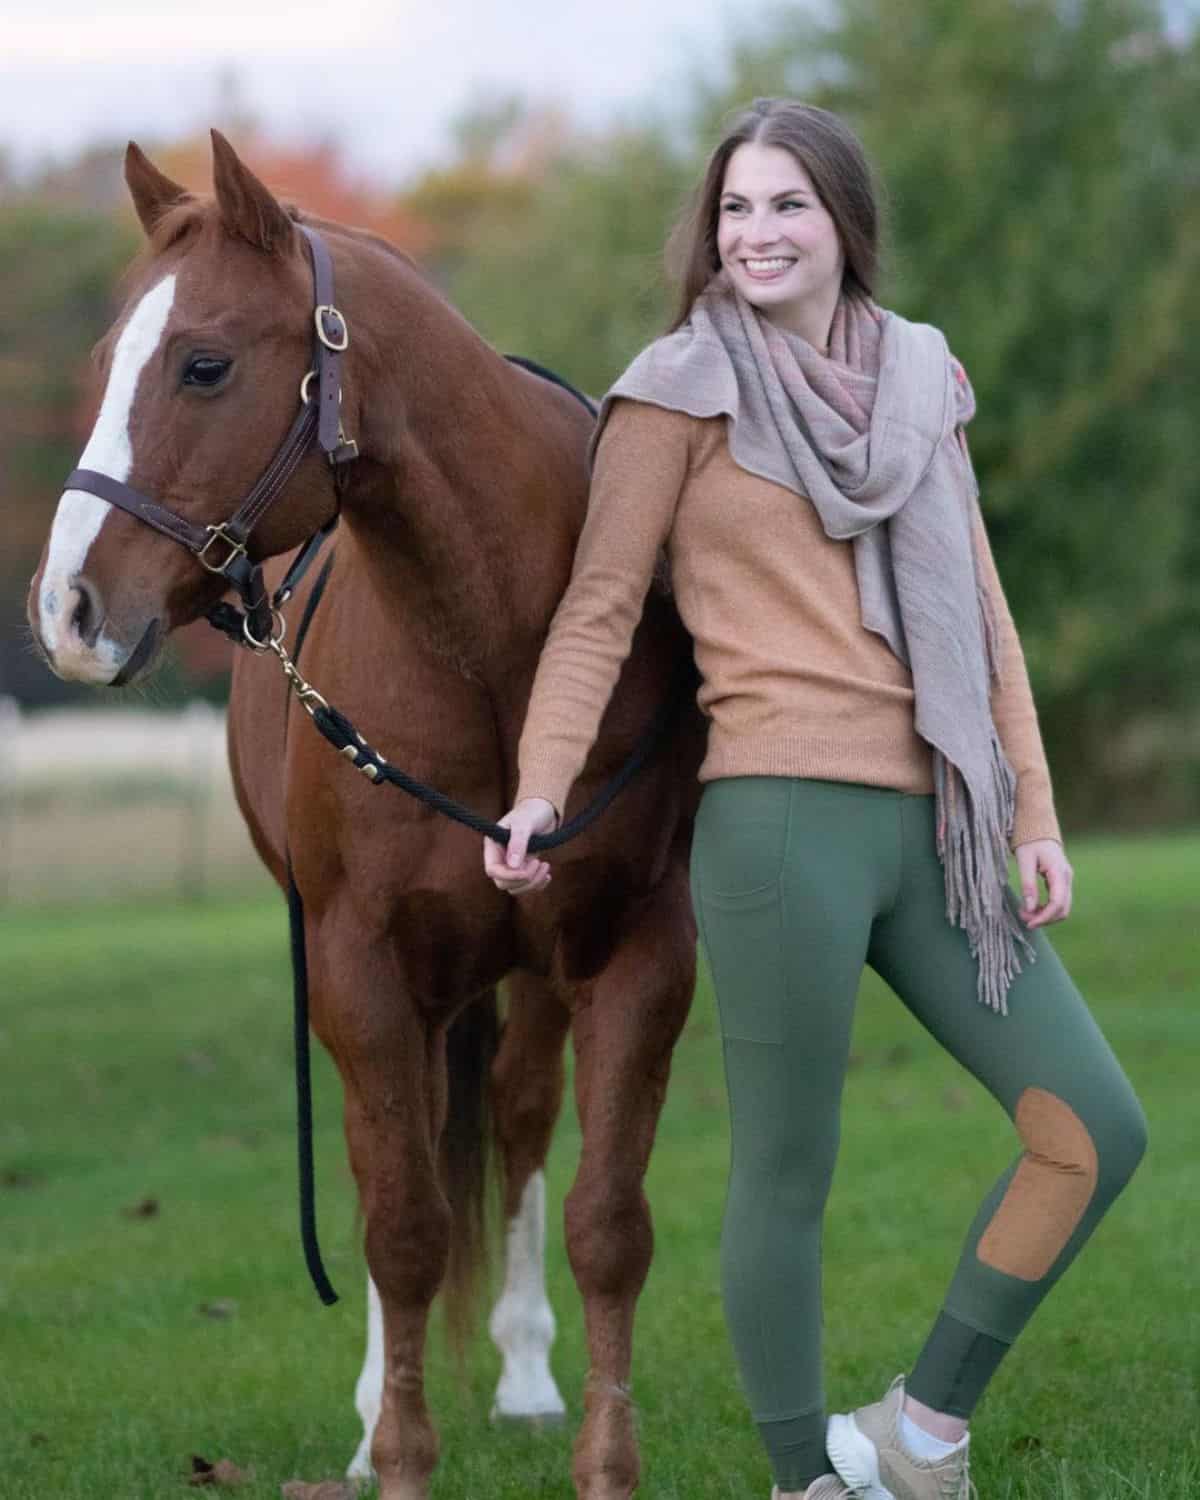 A smiling young woman in an equestrian outfit stands next to a brown horse.